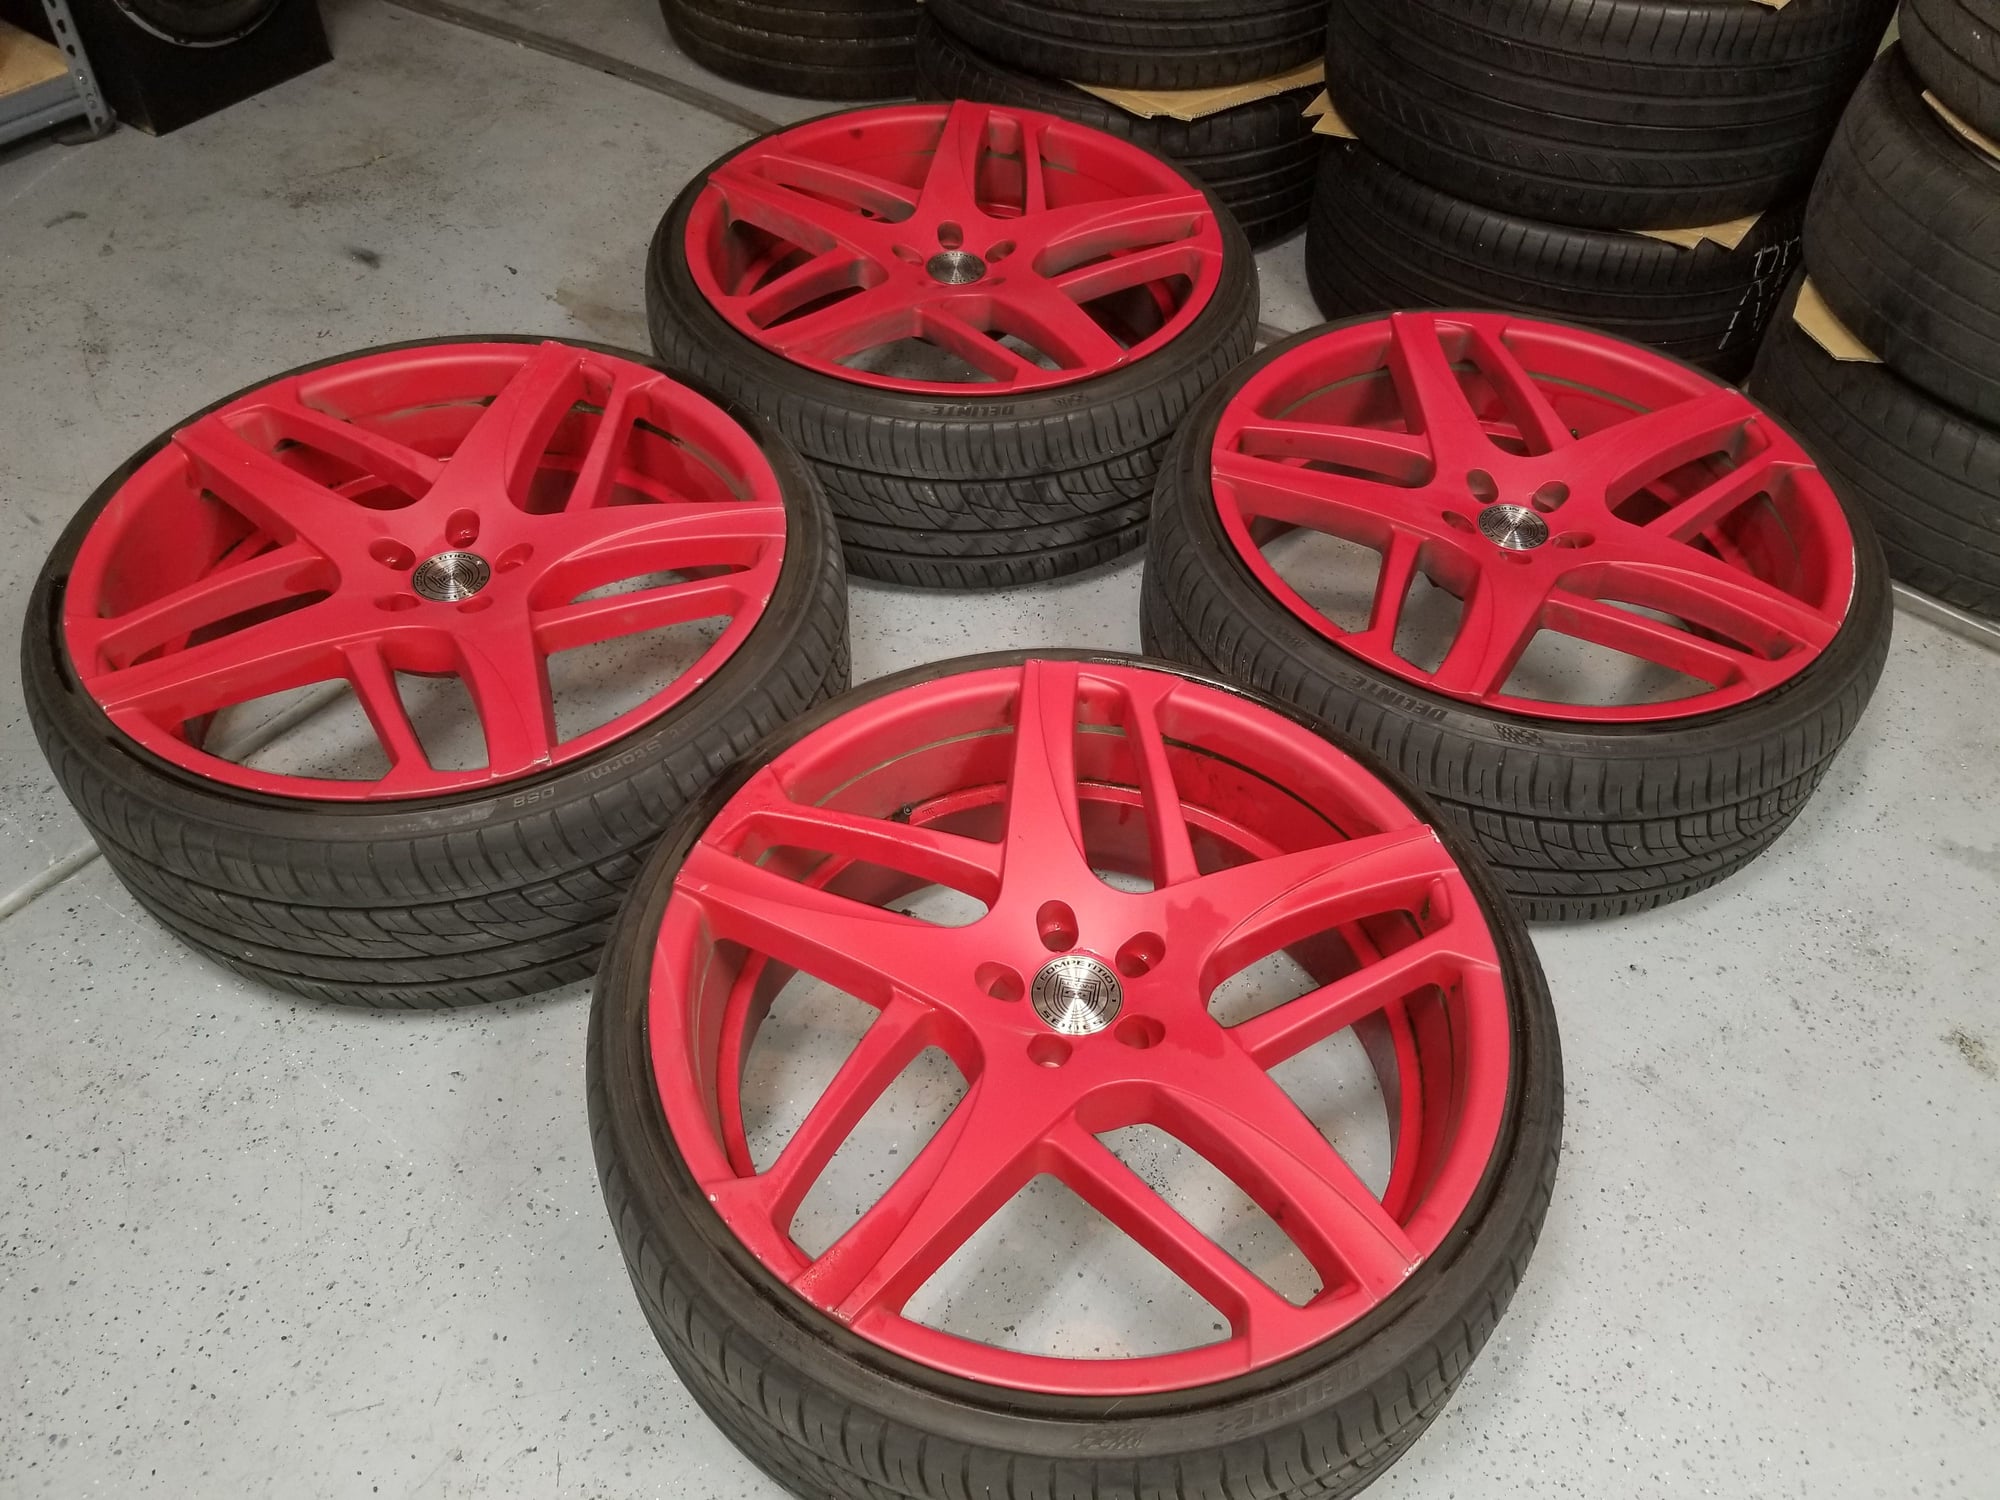 Wheels and Tires/Axles - 24* Lexani Wheels and Tires Red - Used - Las Vegas, NV 89139, United States